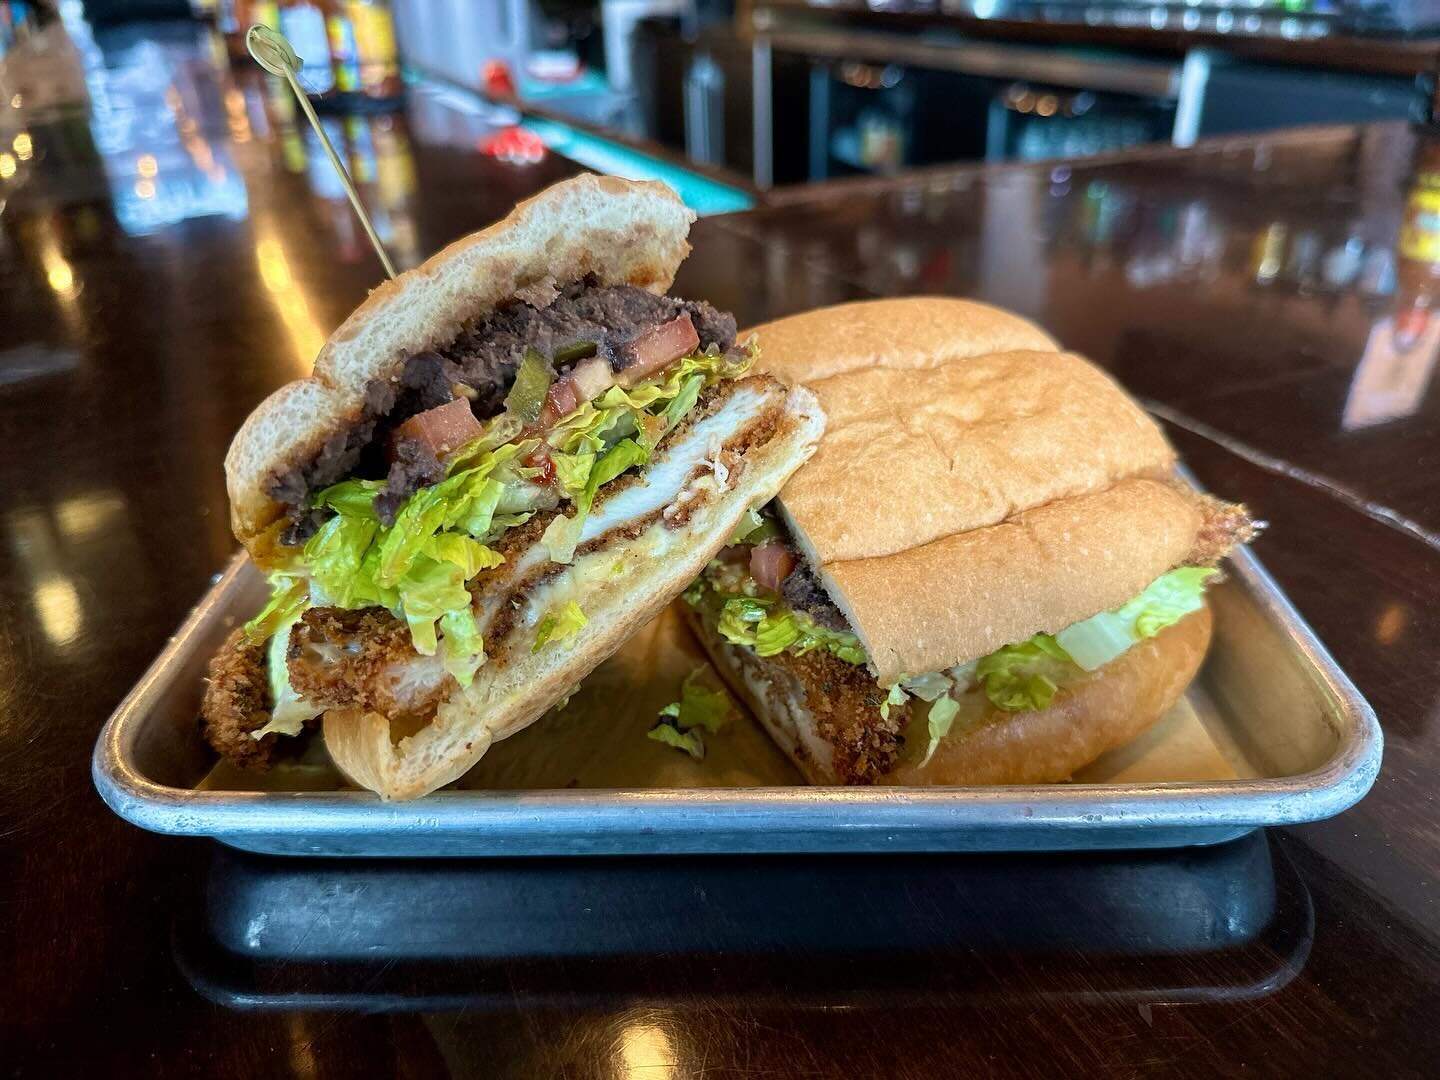 🔥𝔫𝔢𝔴 𝔰𝔭𝔢𝔠𝔦𝔞𝔩𝔰🔥
&bull; CHICKEN MILANESA TORTA, Hand-breaded &amp; fried chicken, lettuce, refried beans, chihuahua cheese, tomatoes, tomatillo-arbol sauce, pickled jalapenos

.PB &amp; J TACO- Thai peanut chicken, pepper jelly, crushed pe